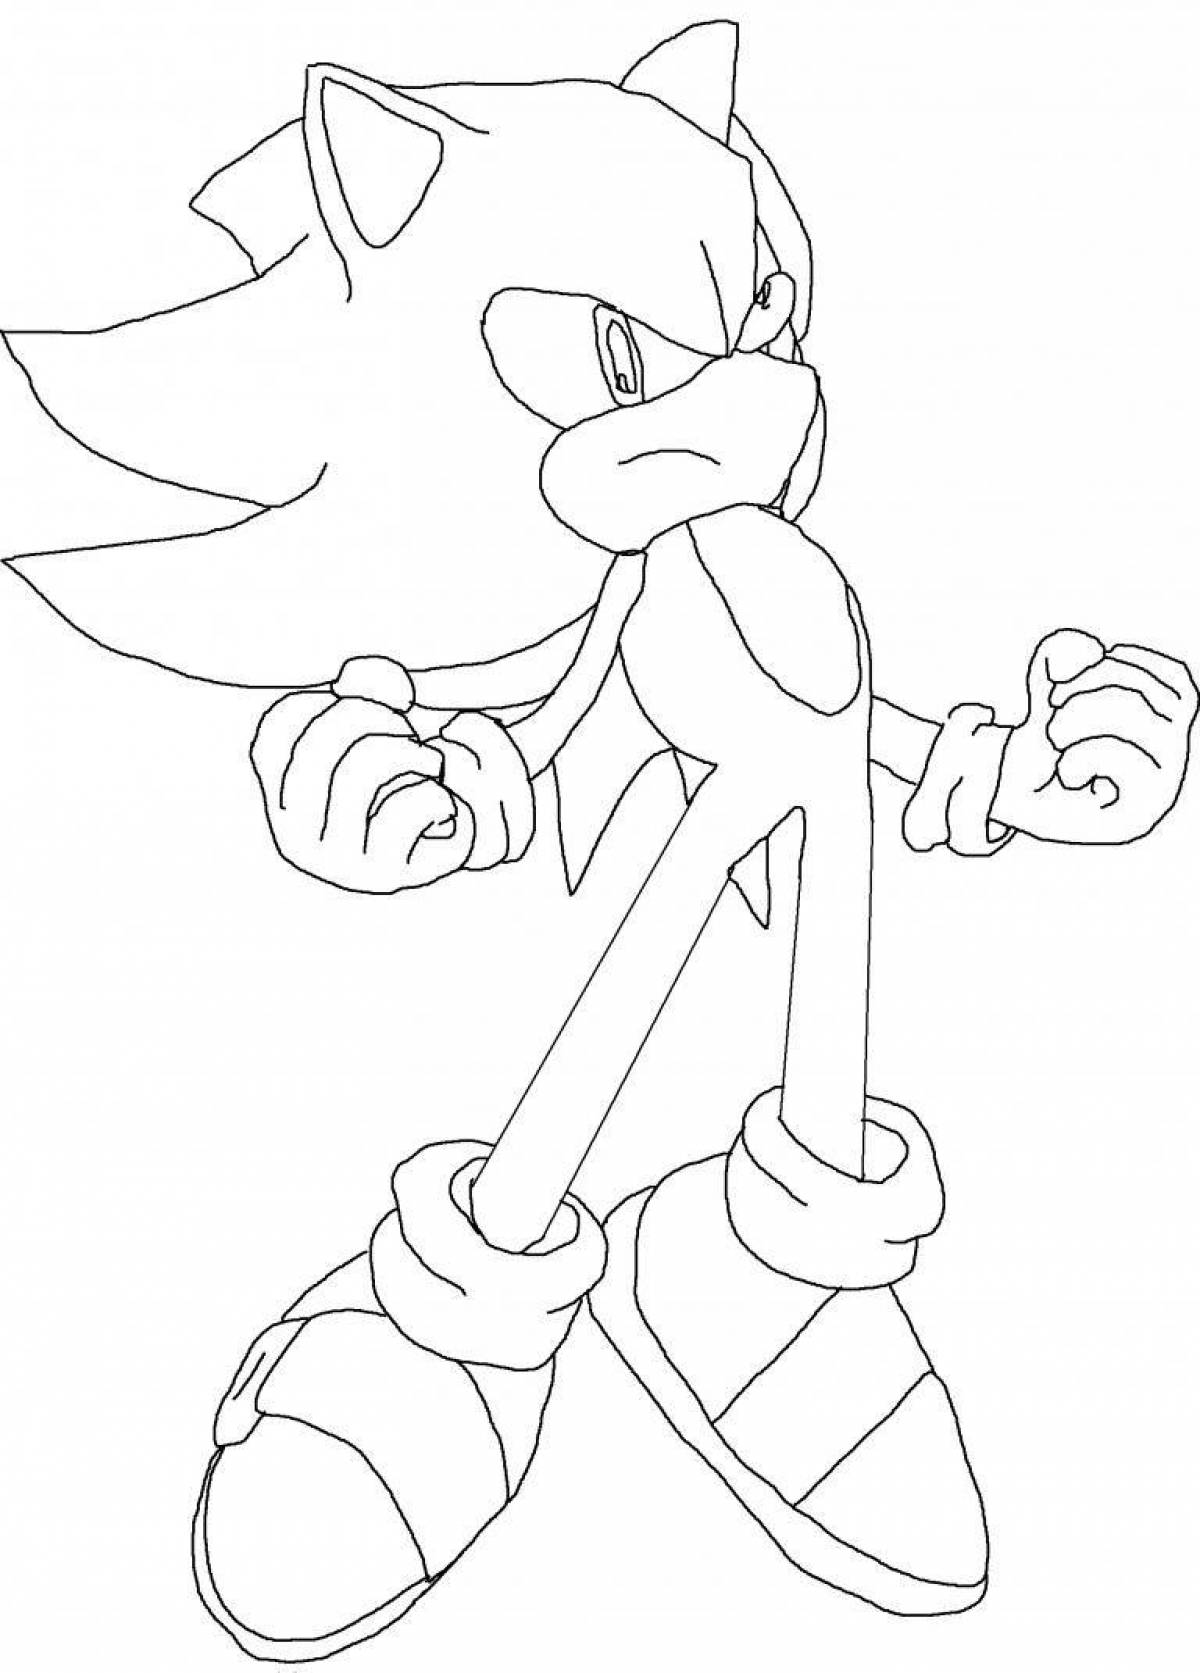 Playful yellow sonic coloring page